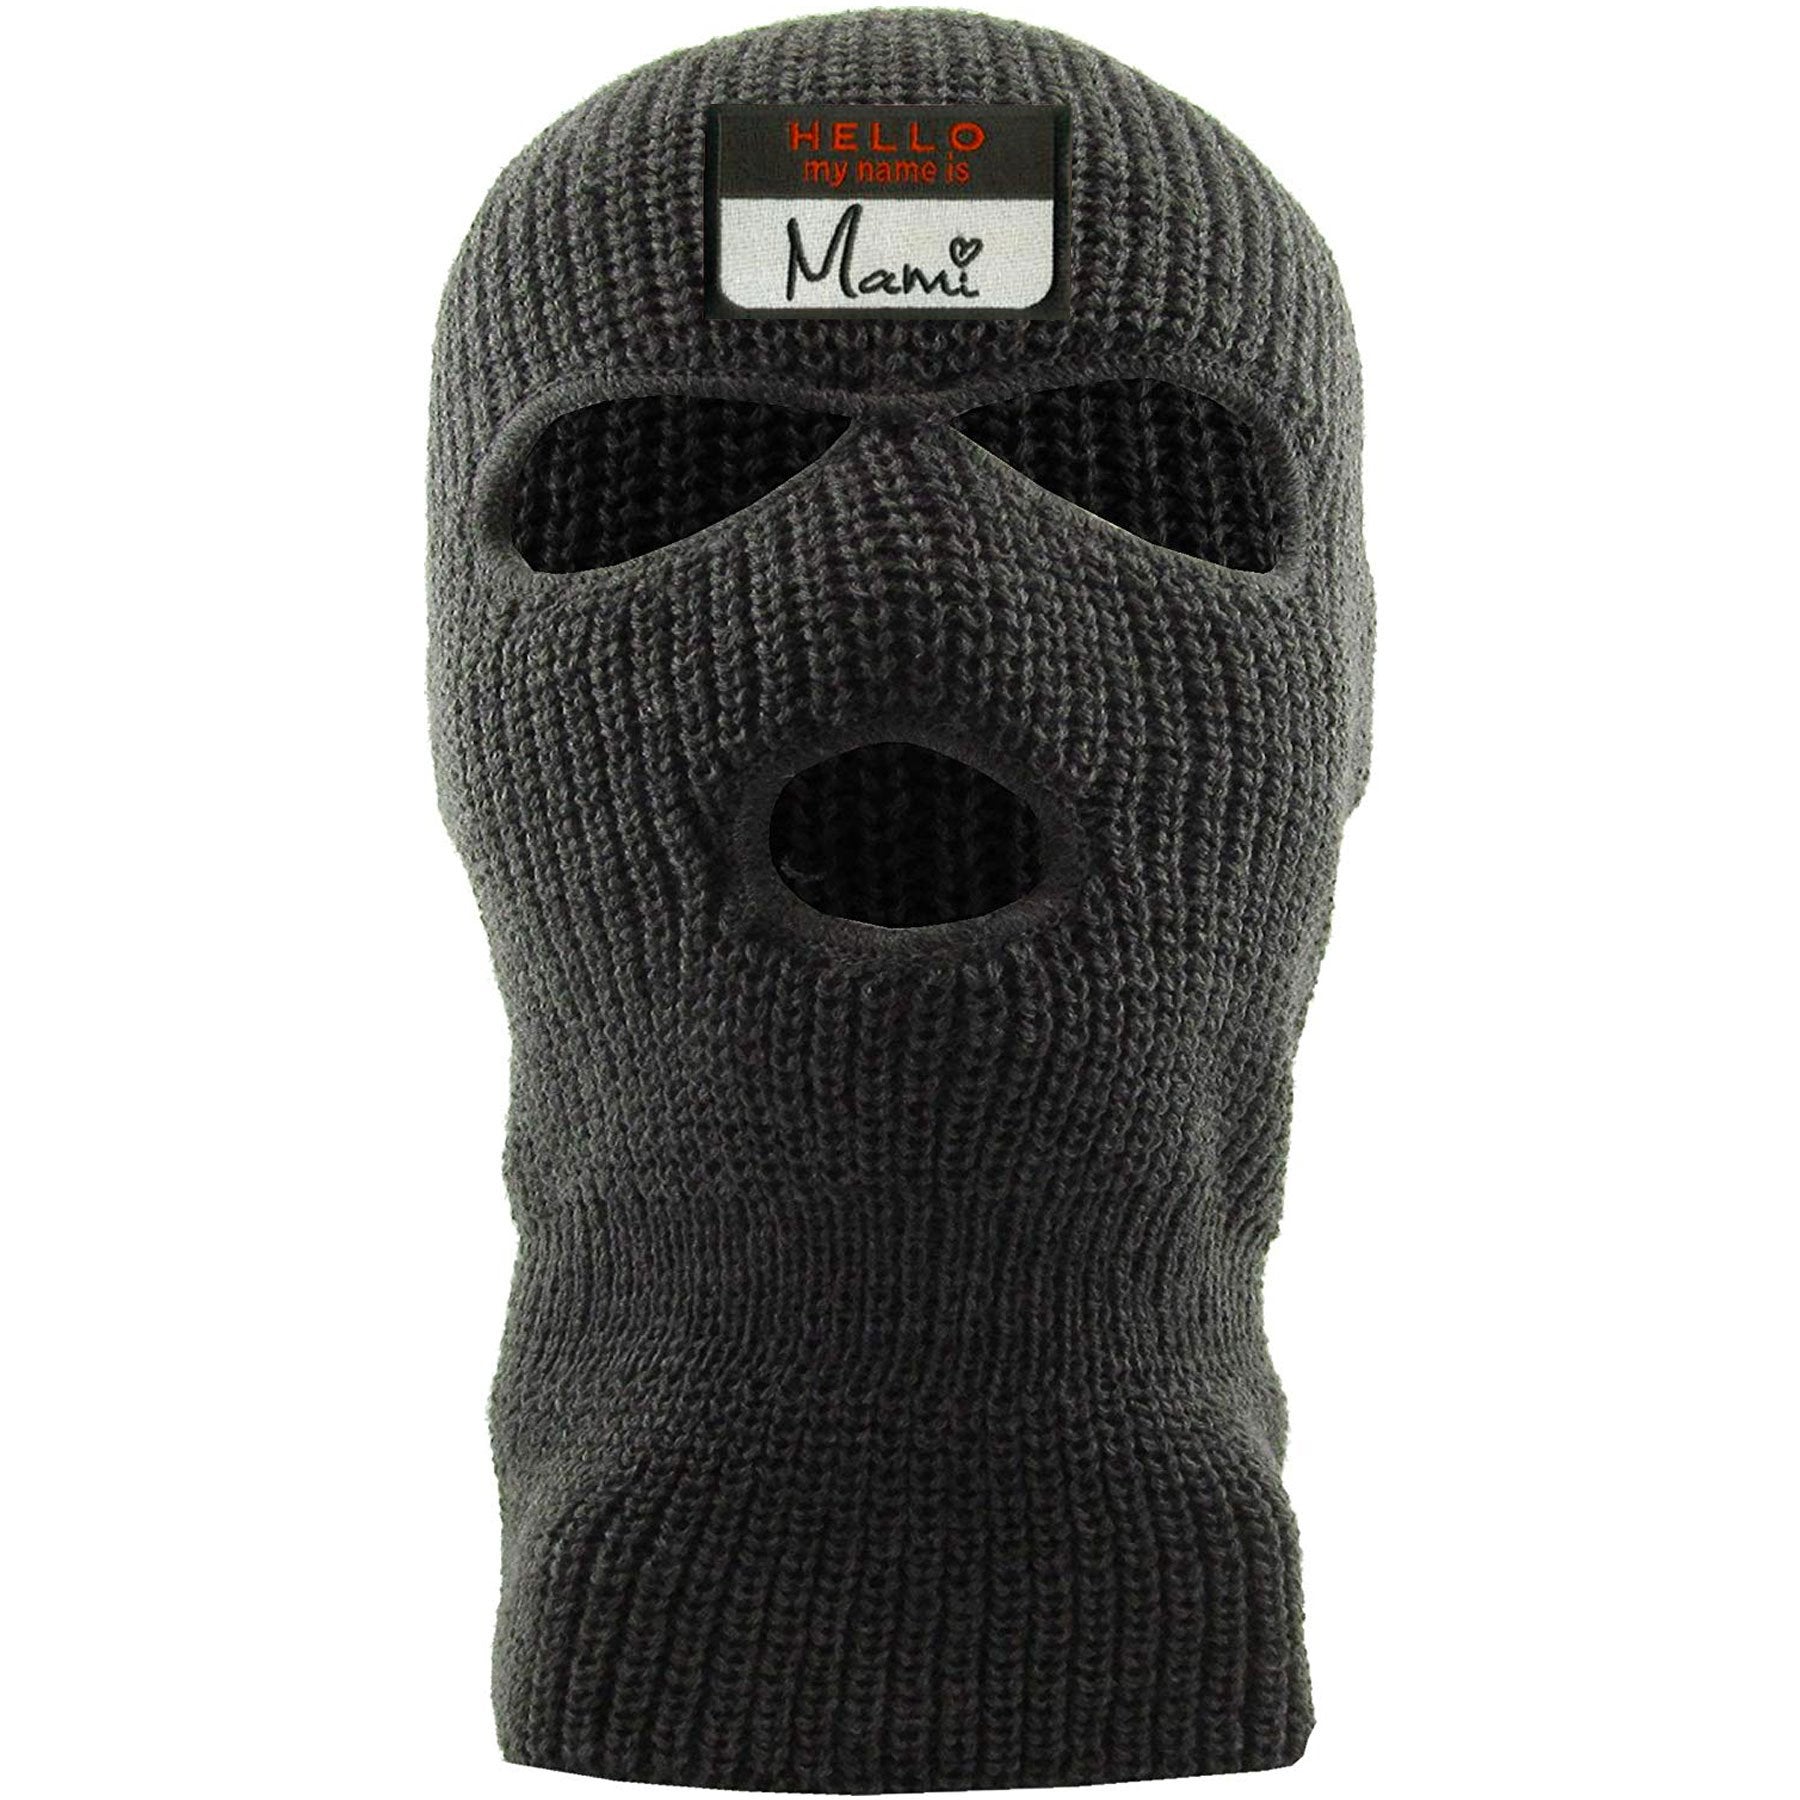 Embroidered on the front of the dark gray hello my name is mami ski mask is the hello my name is mami logo embroidered in white, black, and red